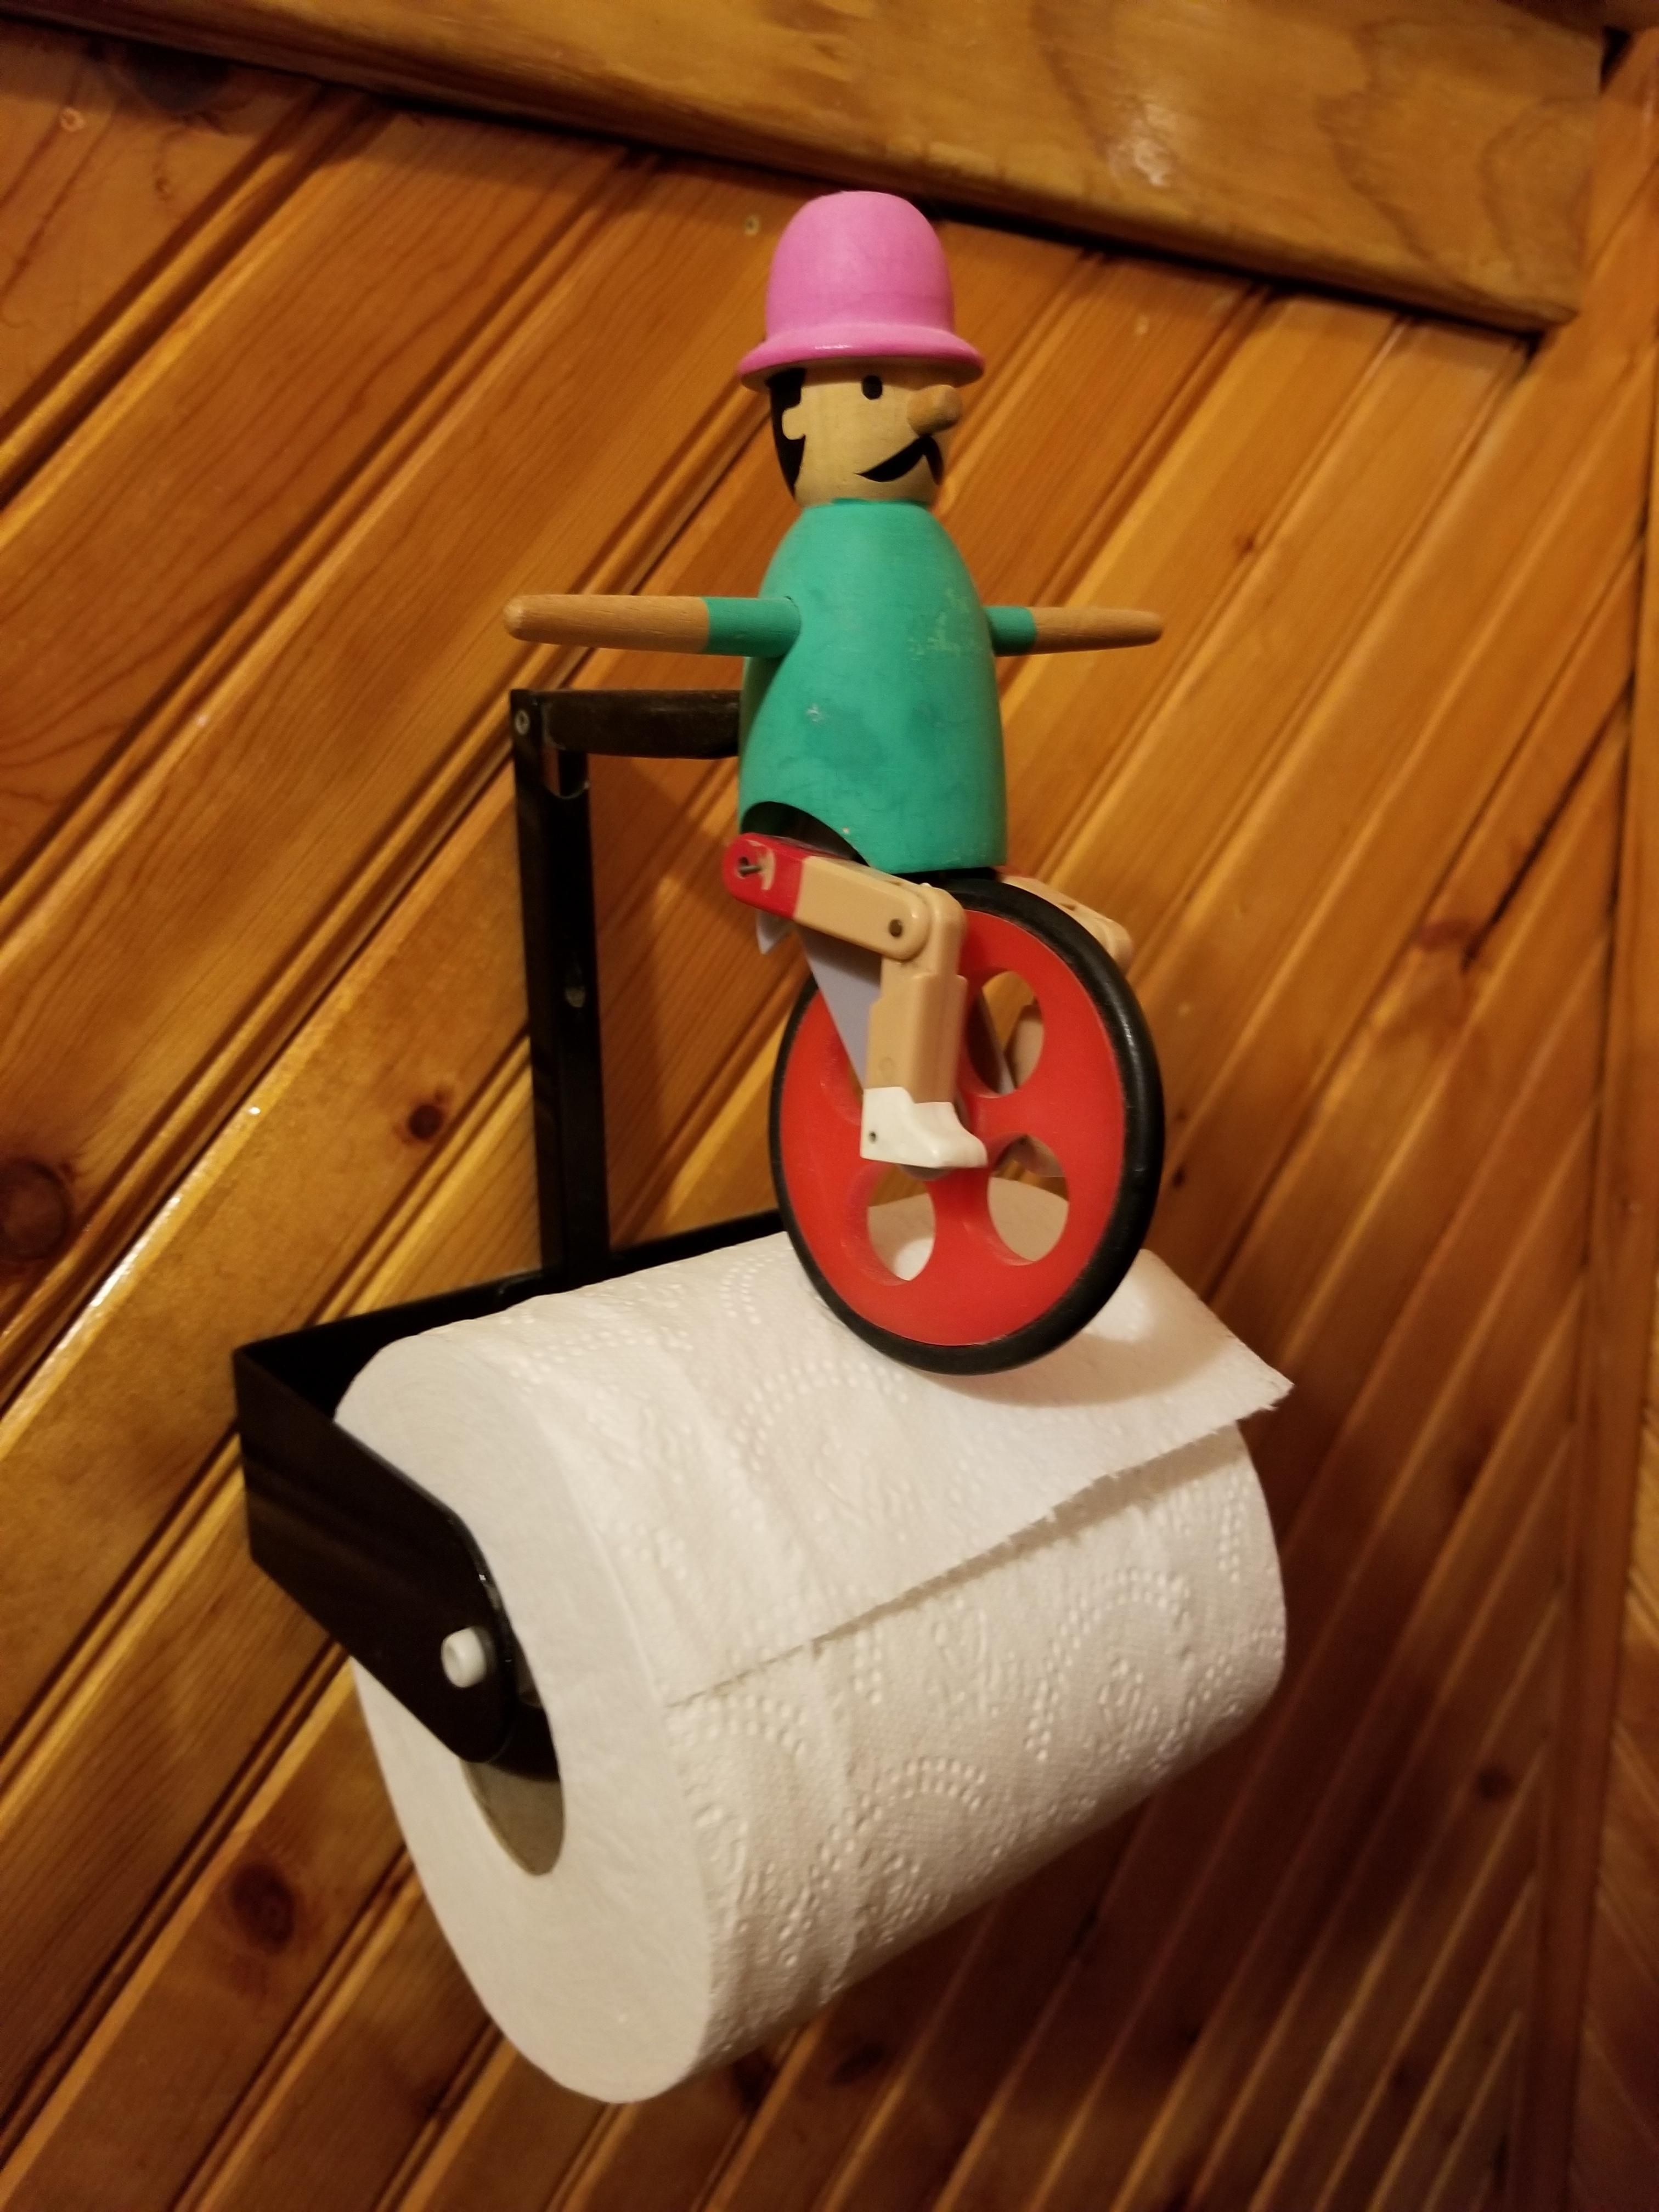 Pepe has been faithfully riding the roll at my parents house for over 22 years.